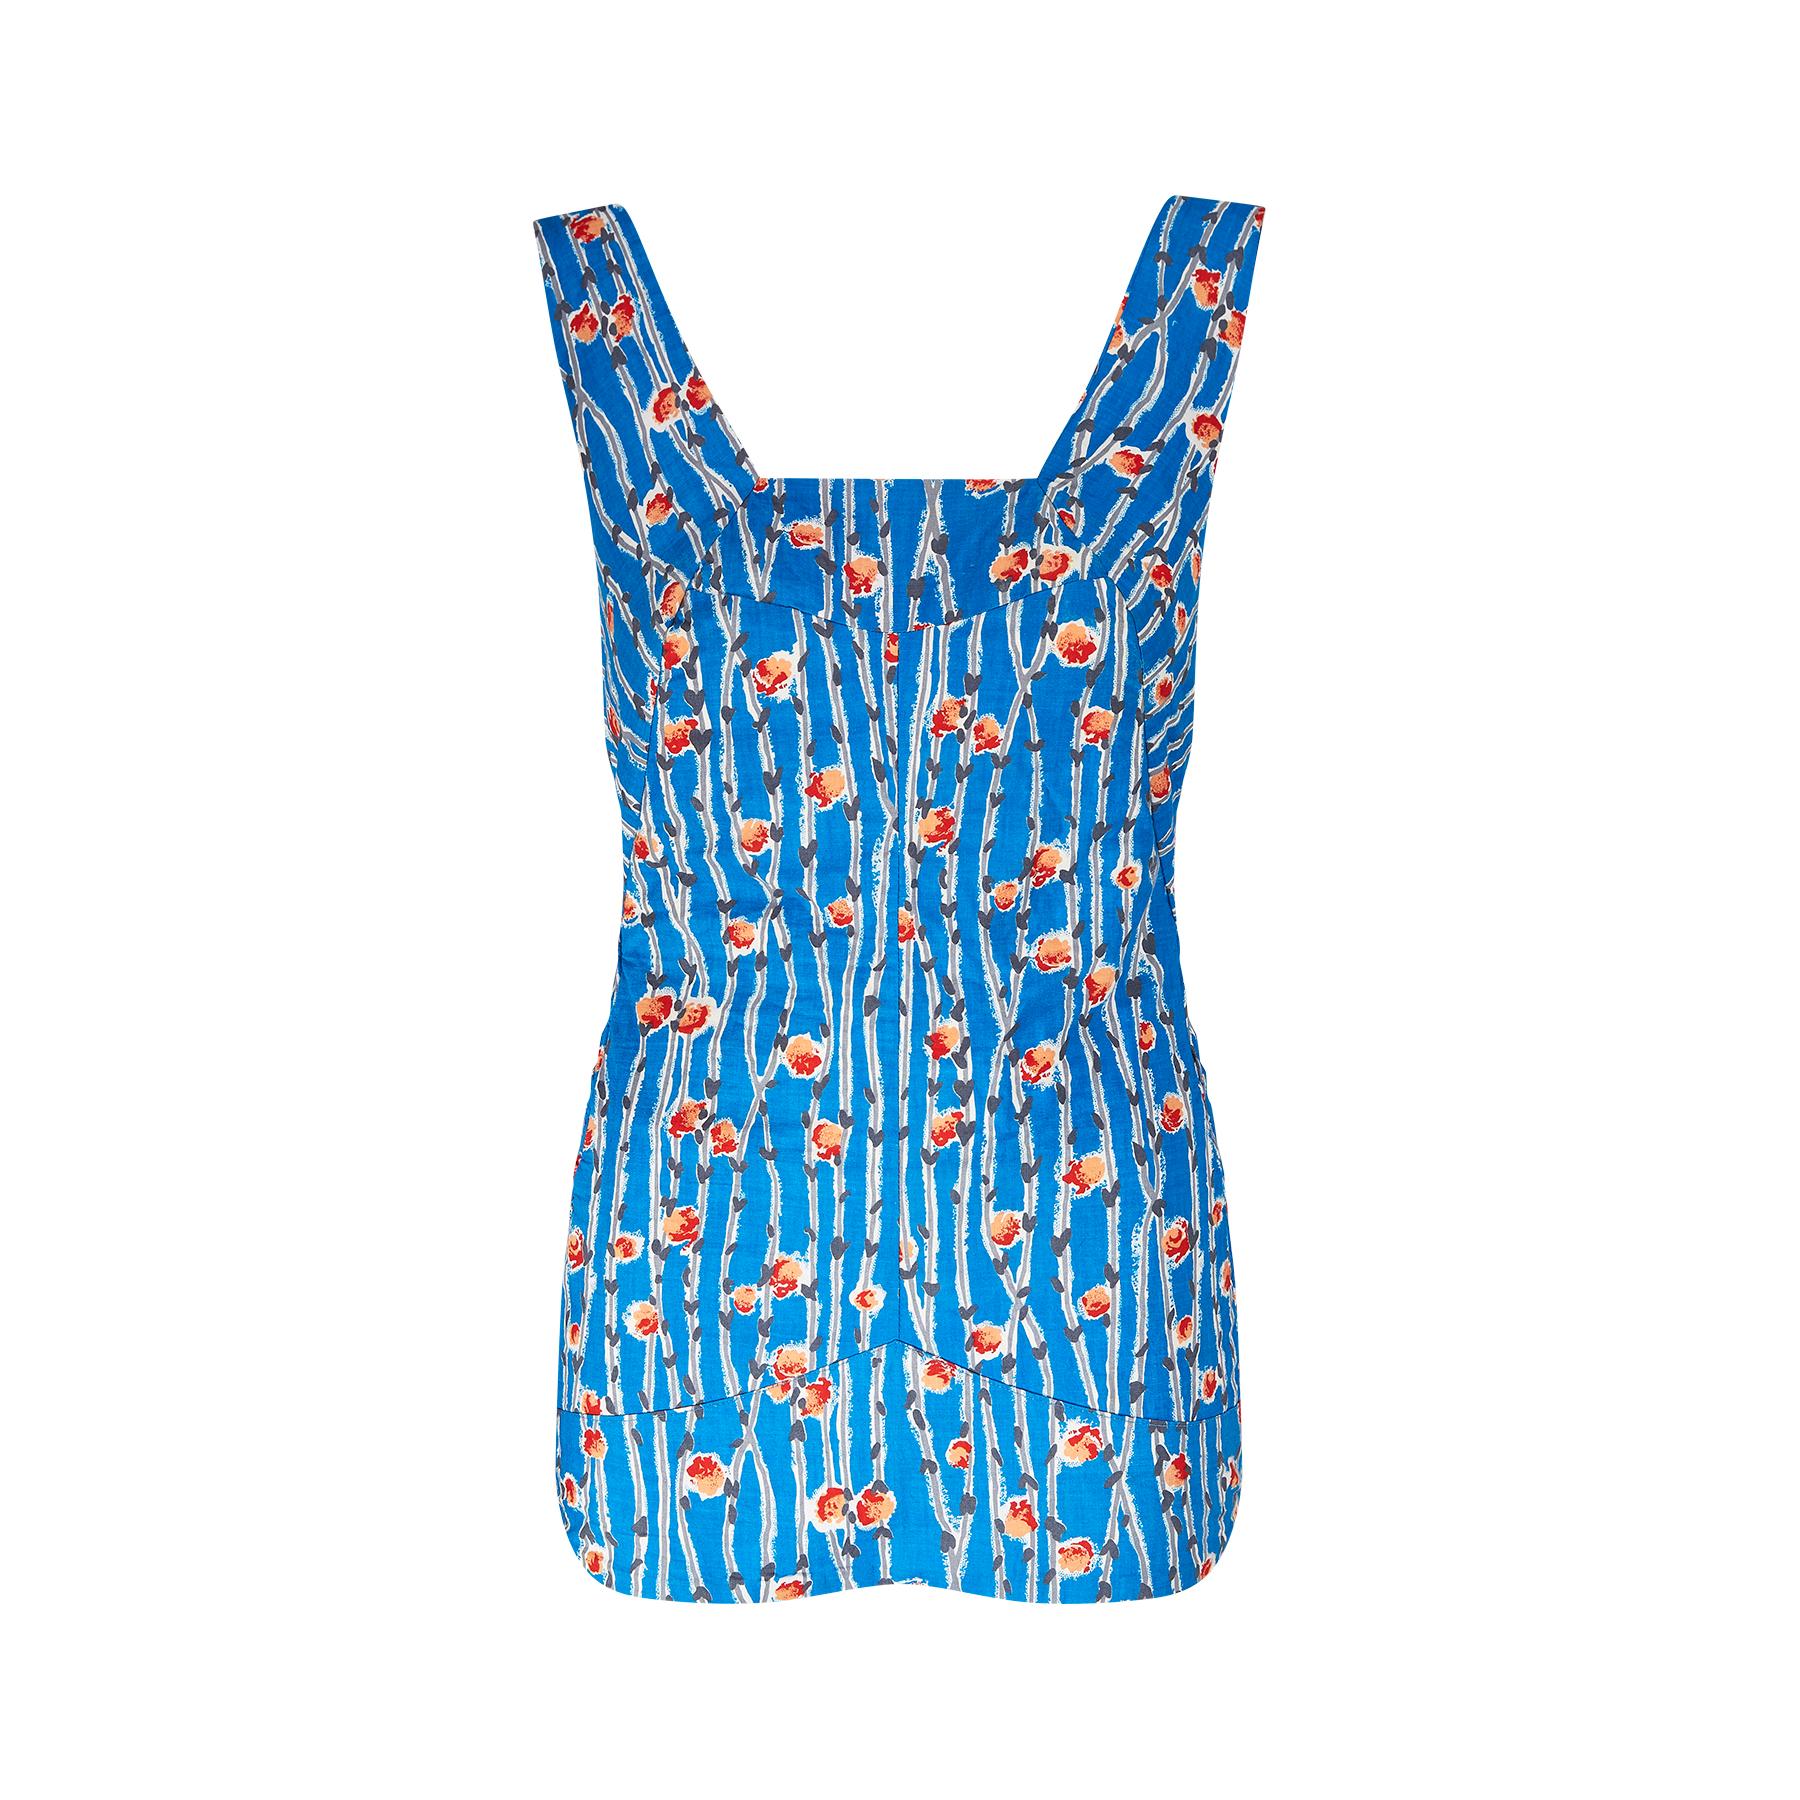 Original late 1950s or very early 1960s smocked one-piece swimsuit made from cotton in an azure blue with a stylised trellis rose and rose stem print. The swimsuit has wide straps and a square neckline with a beautifully shaped and paneled torso. 